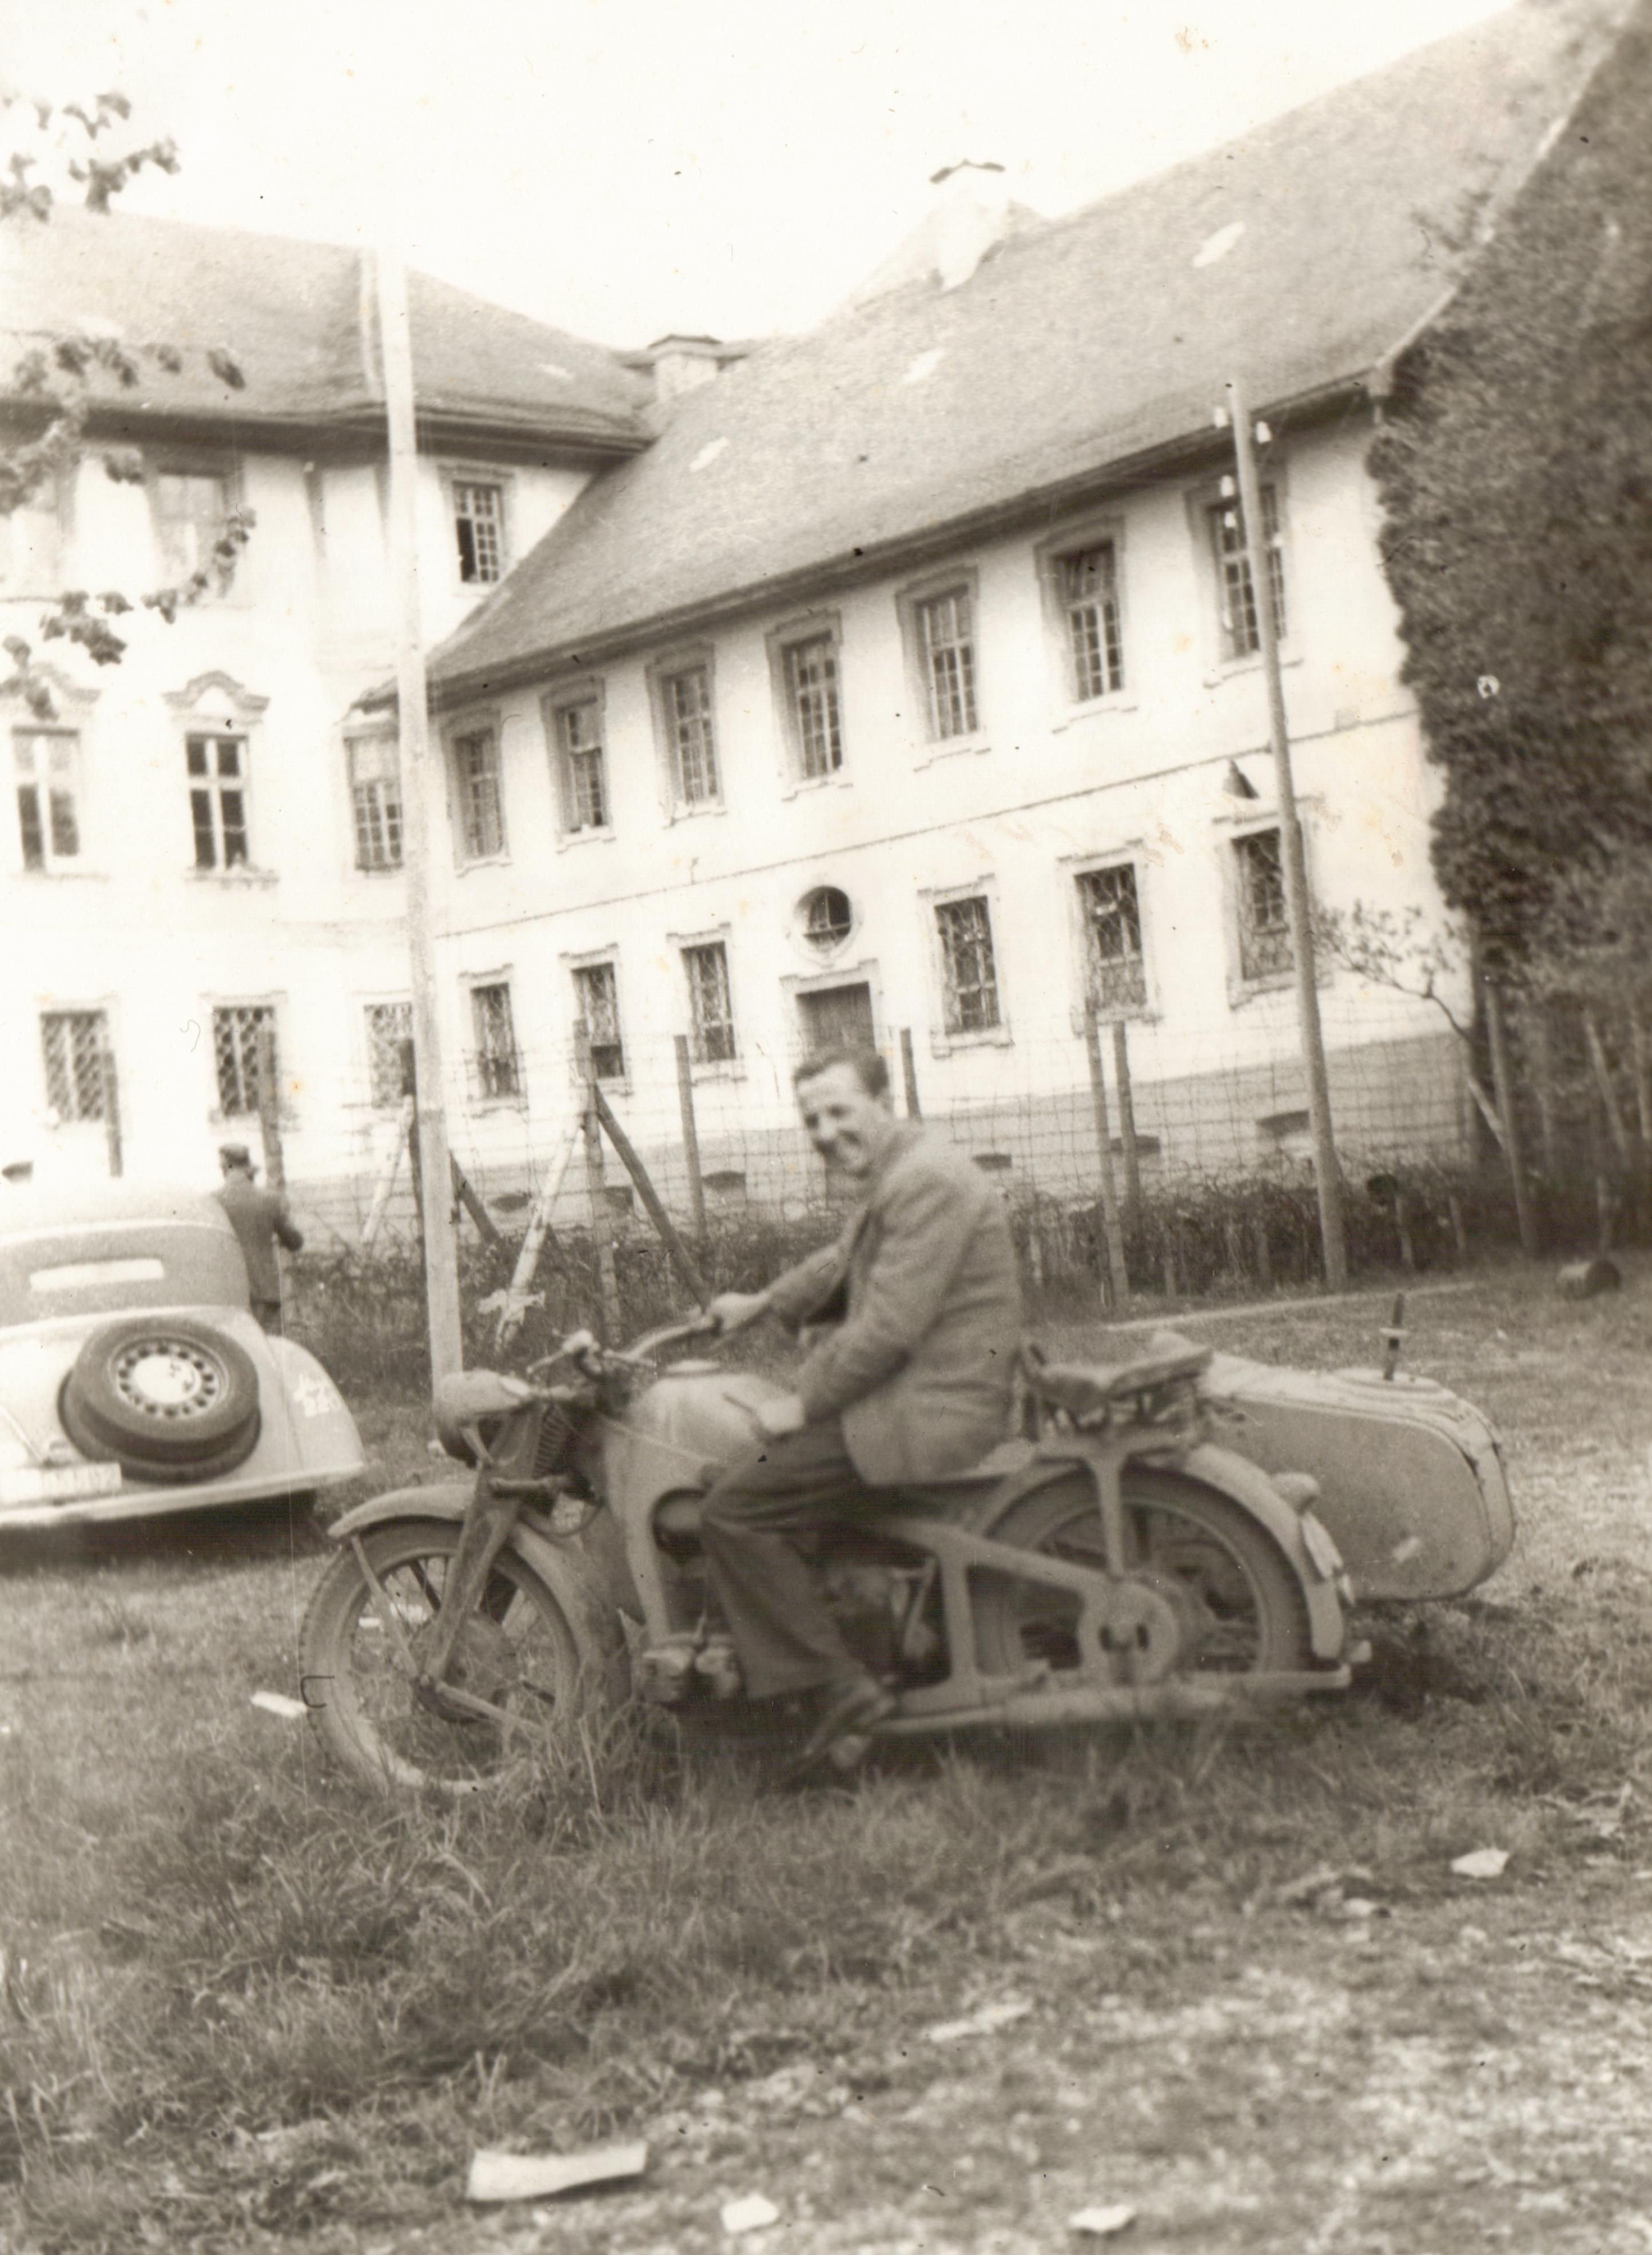 Harold 'Happy' Hepburn sitting on a German motorcycle just after the Liberation of Bad Wuzach, April 1945.